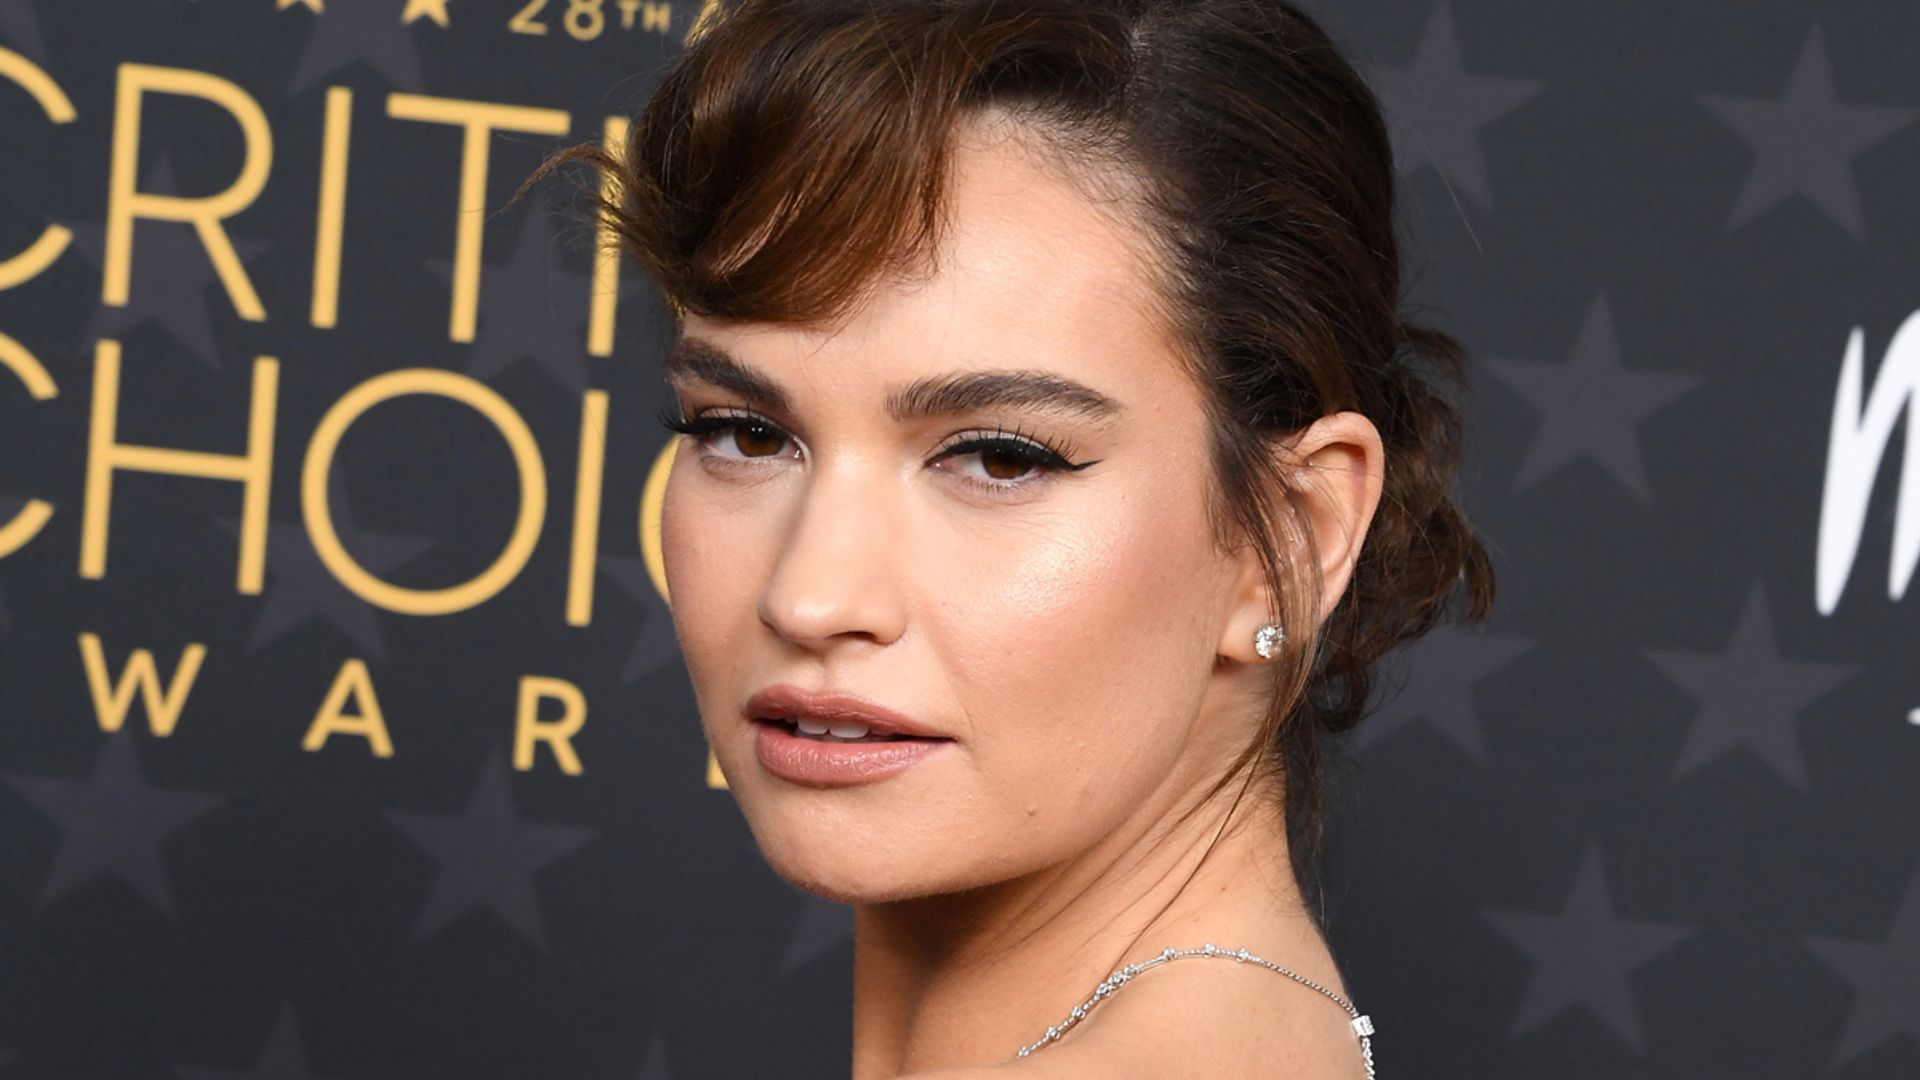 Lily James shocks in sheer dress – and looks seriously beautiful